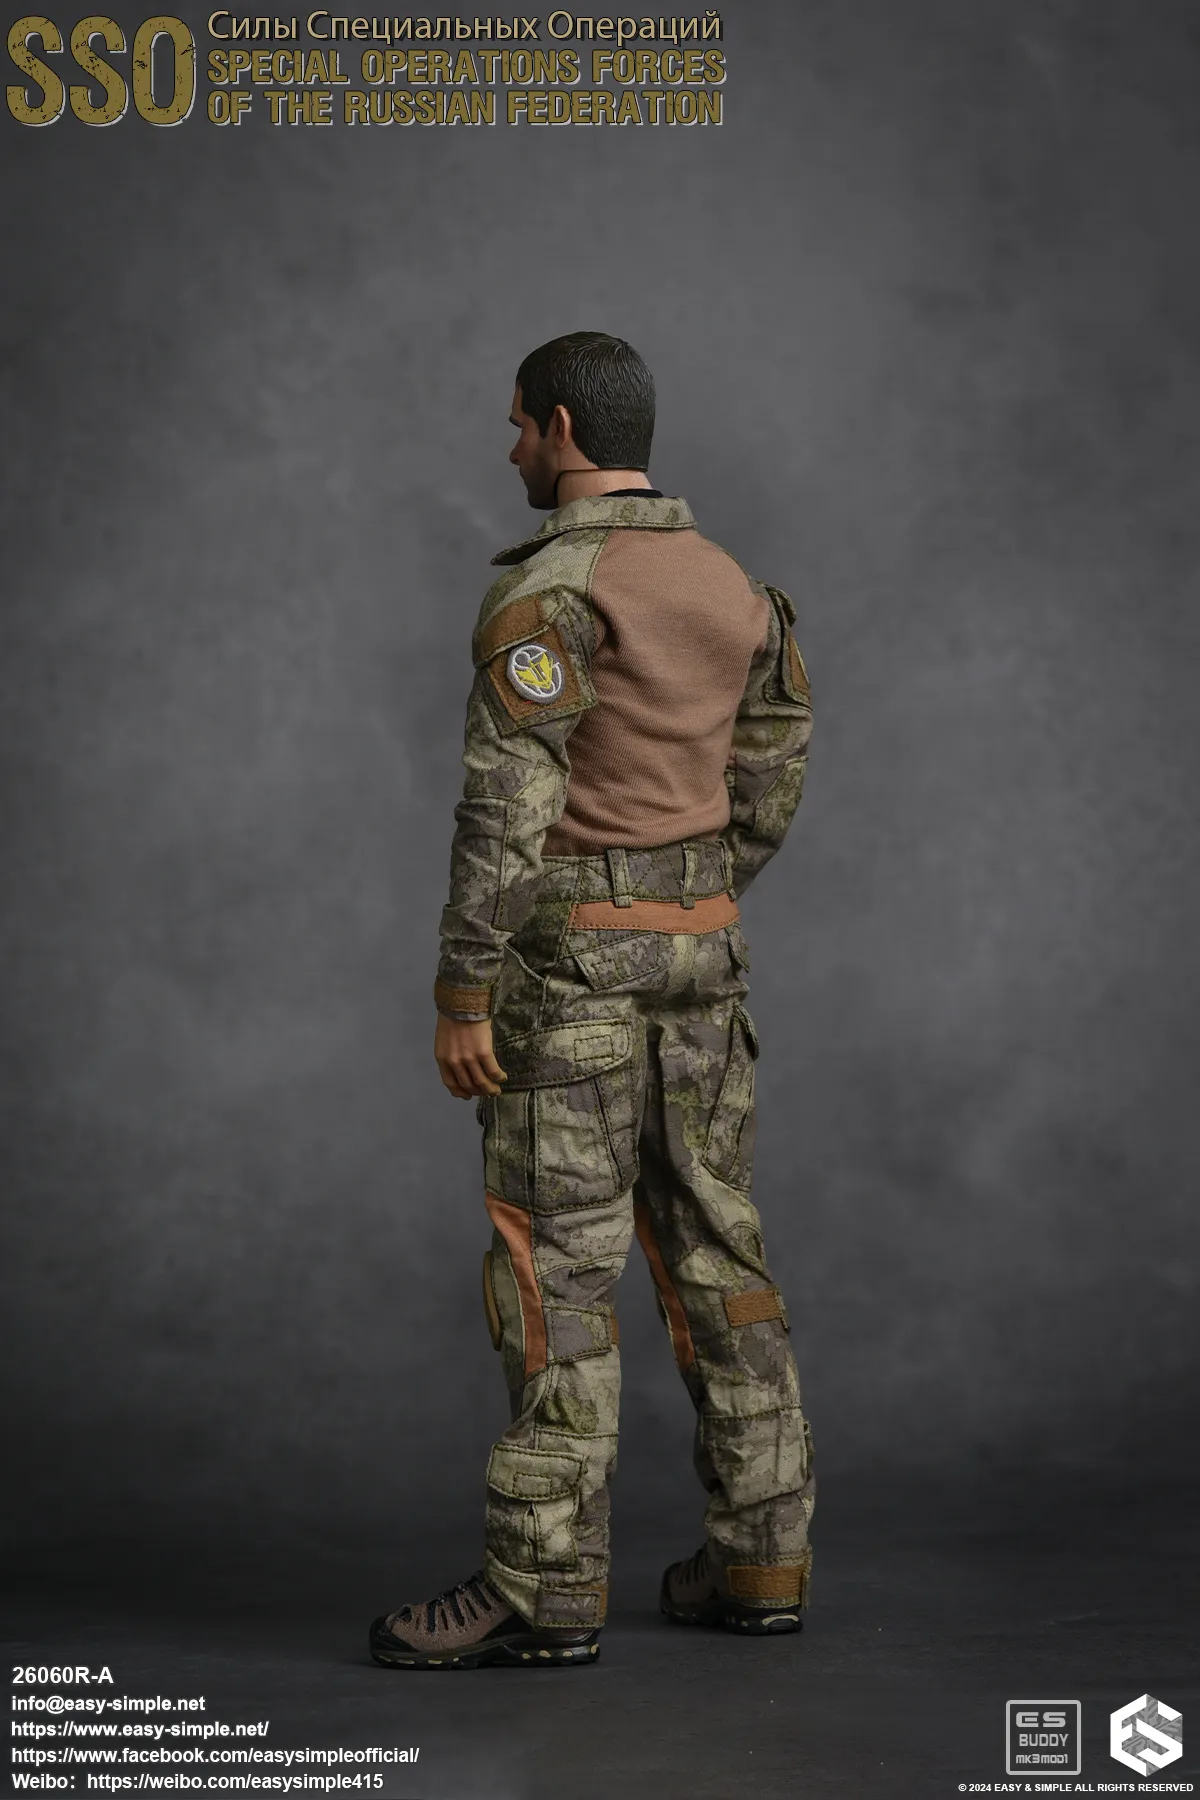 Male - NEW PRODUCT: Easy&Simple 26060R-A Russian Special Operations Forces (SSO) Format,webp